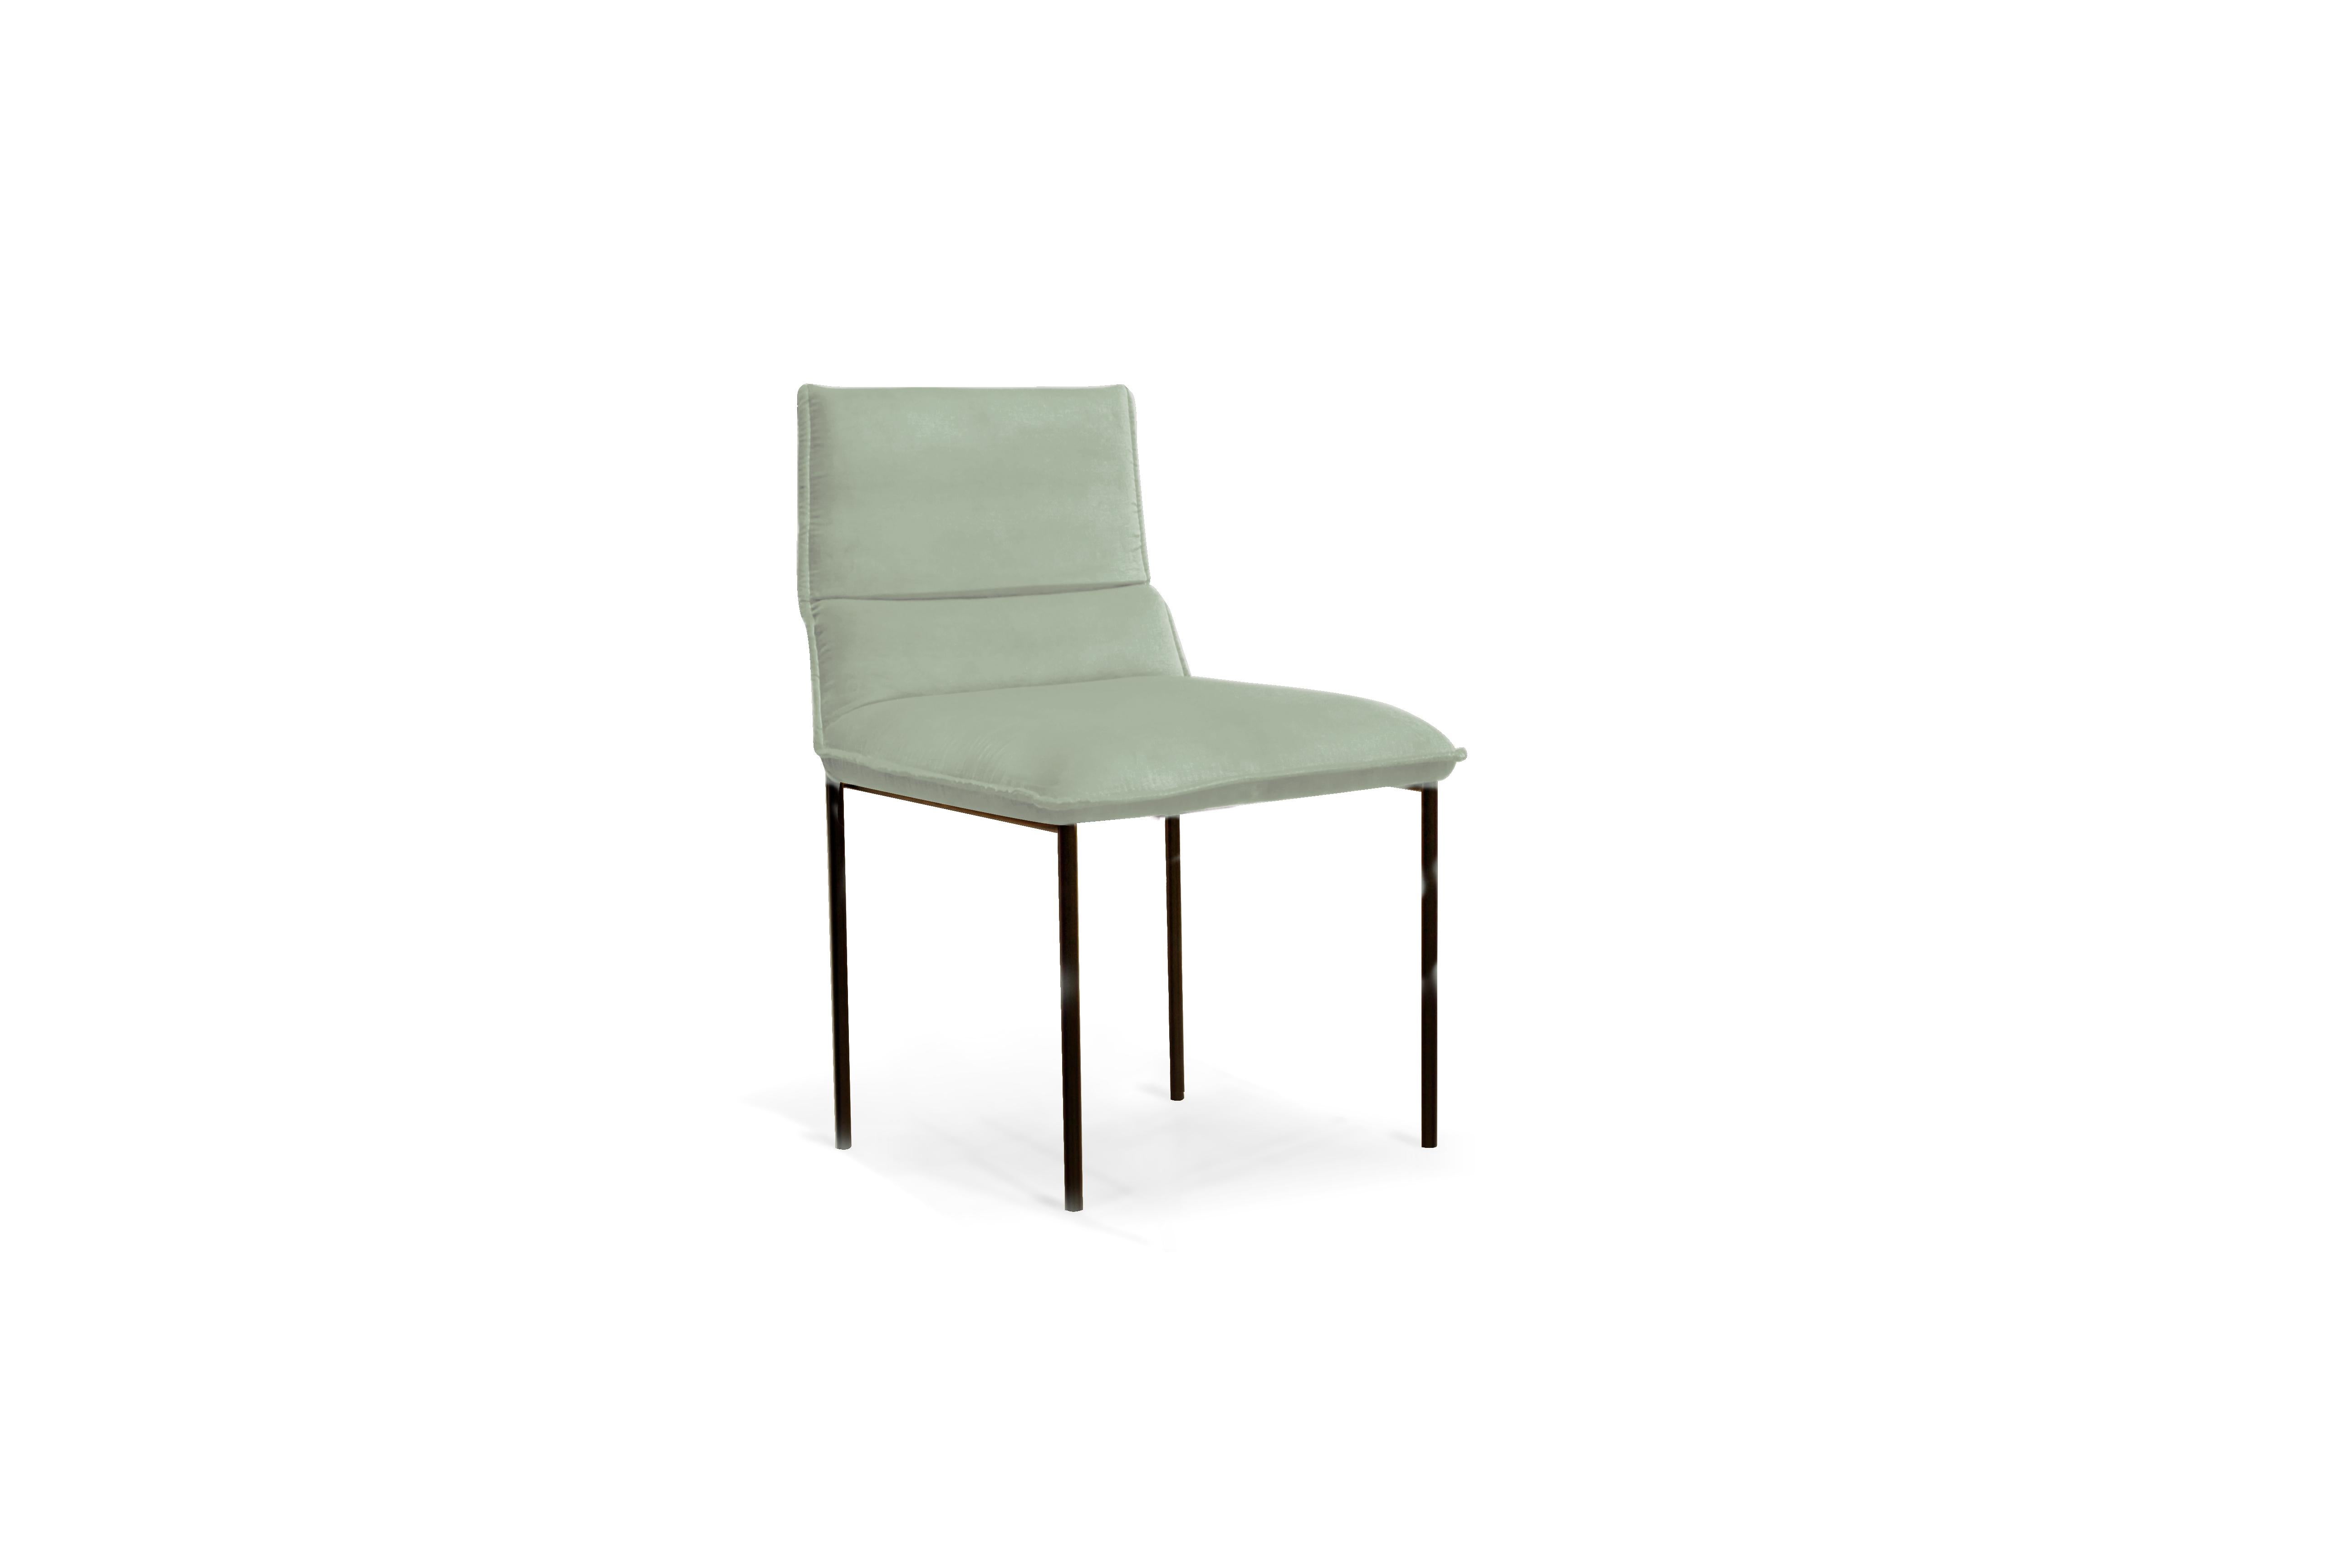 Unique Jeeves chair by Collector
Dimensions: W 45 x D 52 x H 80 cm
Materials: Metal, fabric.
Other materials available. 

The Collector brand aims to be part of the daily life by fusing furniture to our home routine and lifestyle, that’s why we’ve